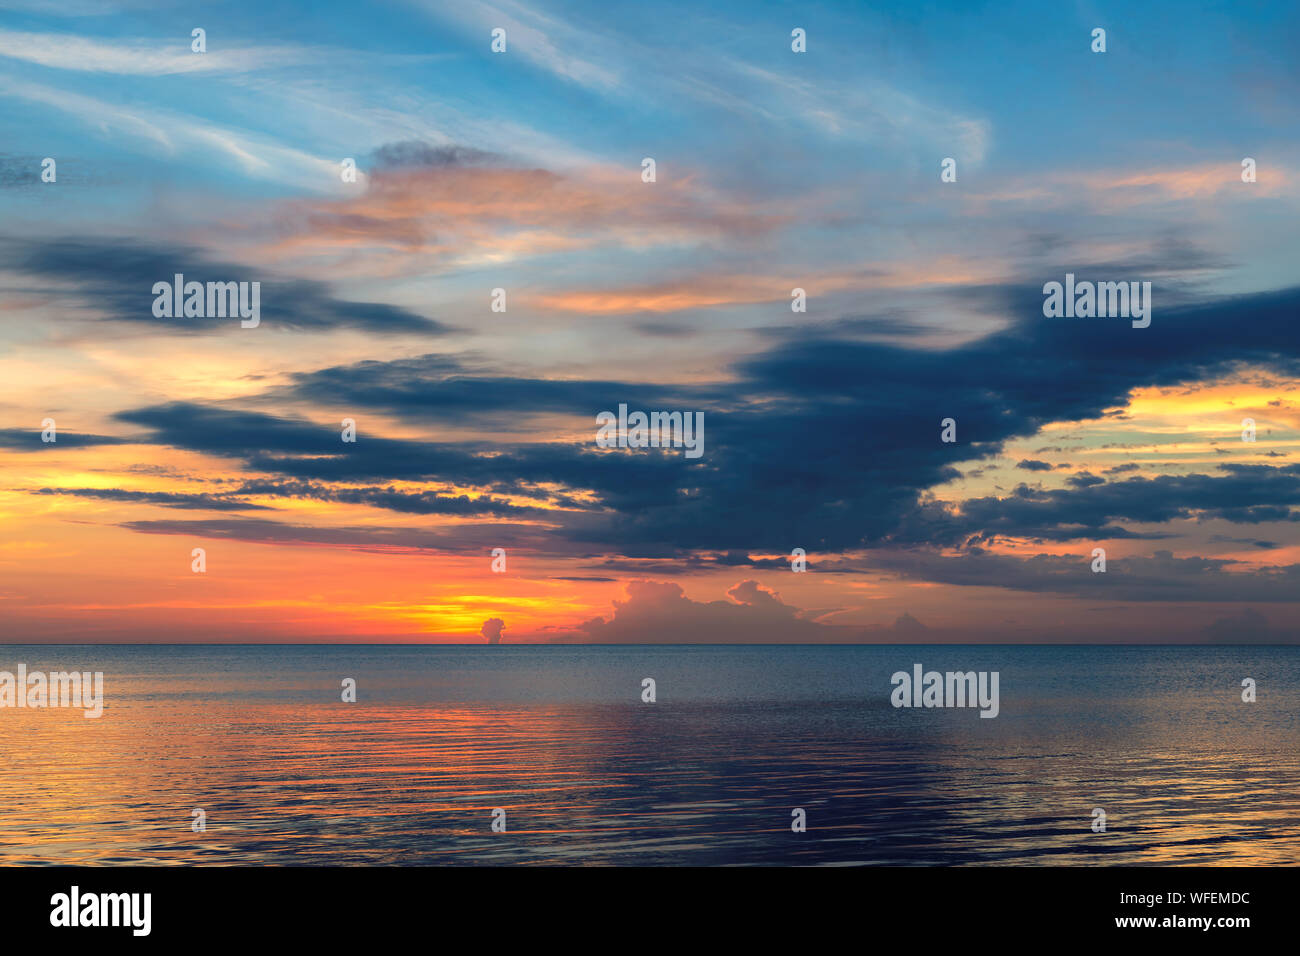 Sunrise by the ocean beach in Key Biscayne, Florida Stock Photo